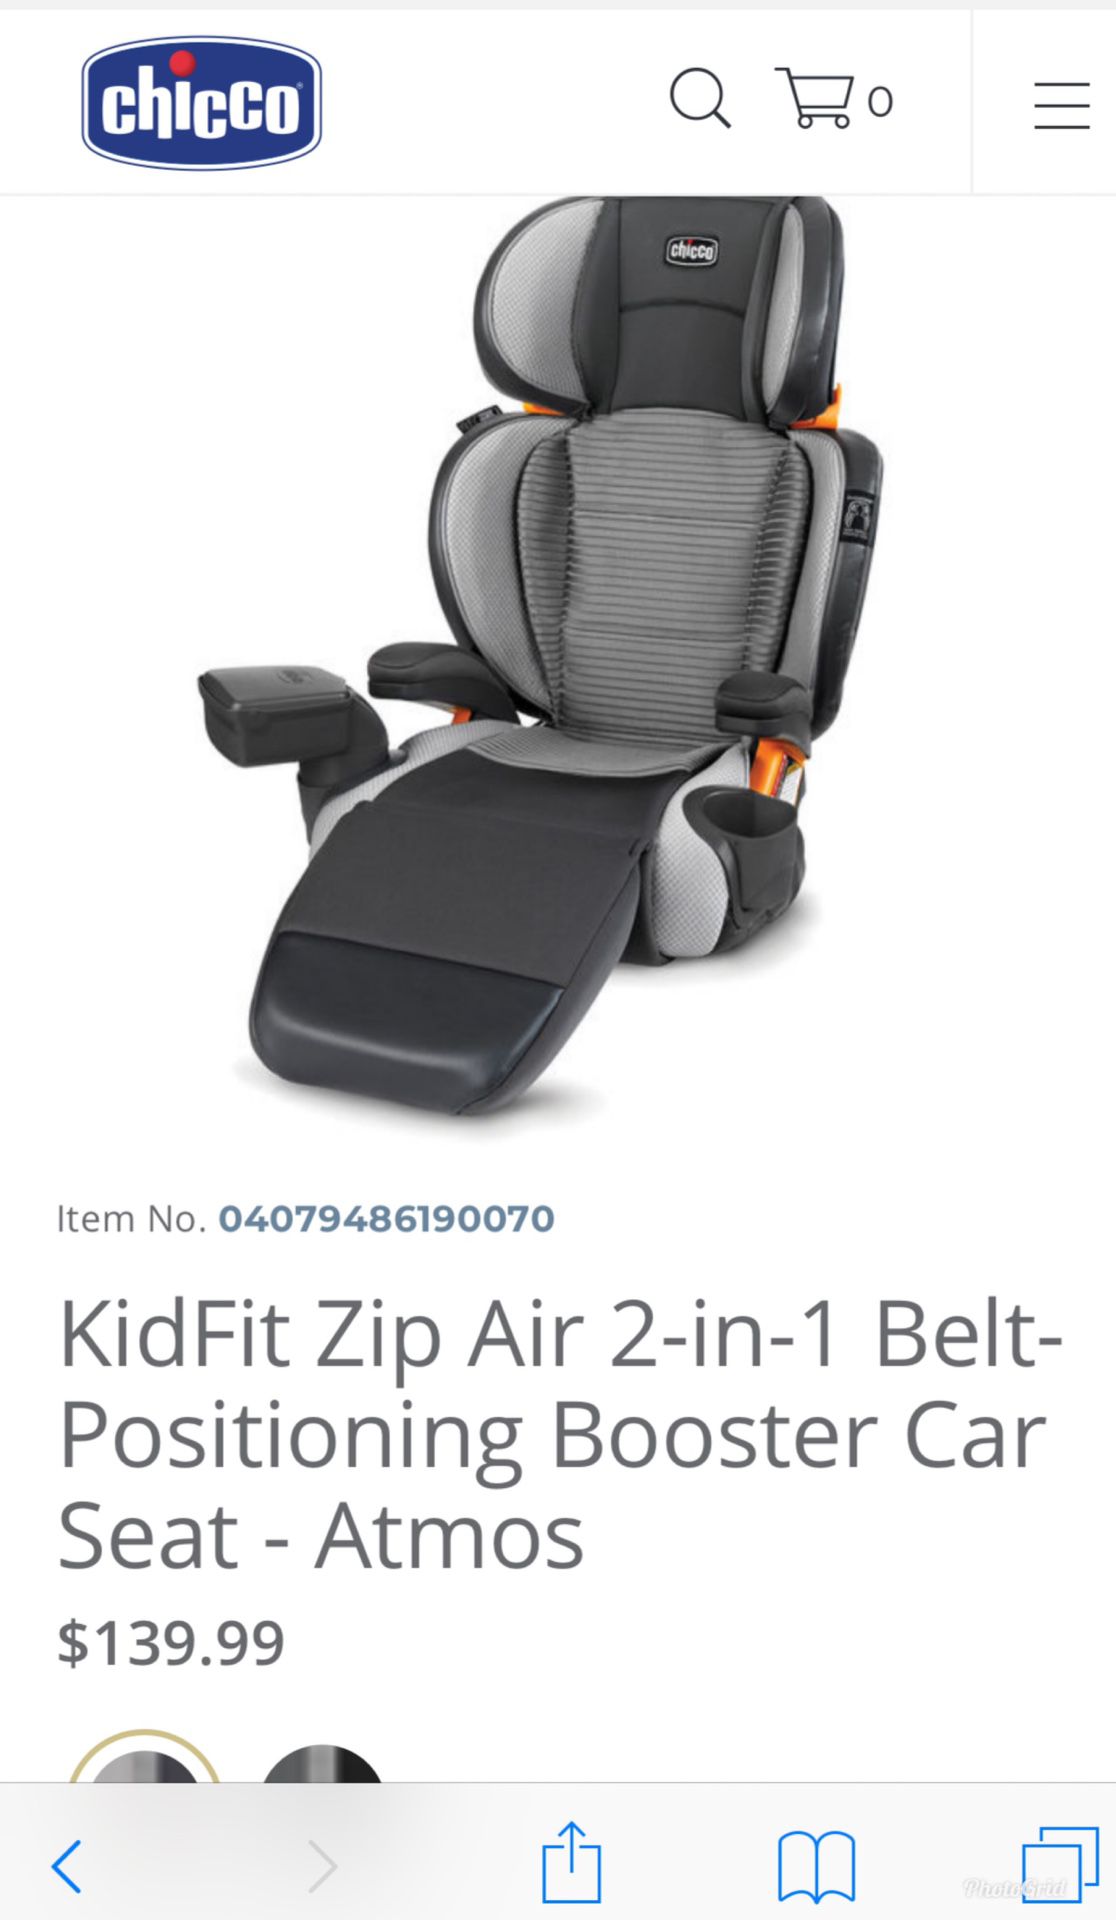 Chicco KidFit Zip Air 2-in-1 Belt positioning Booster Car seat